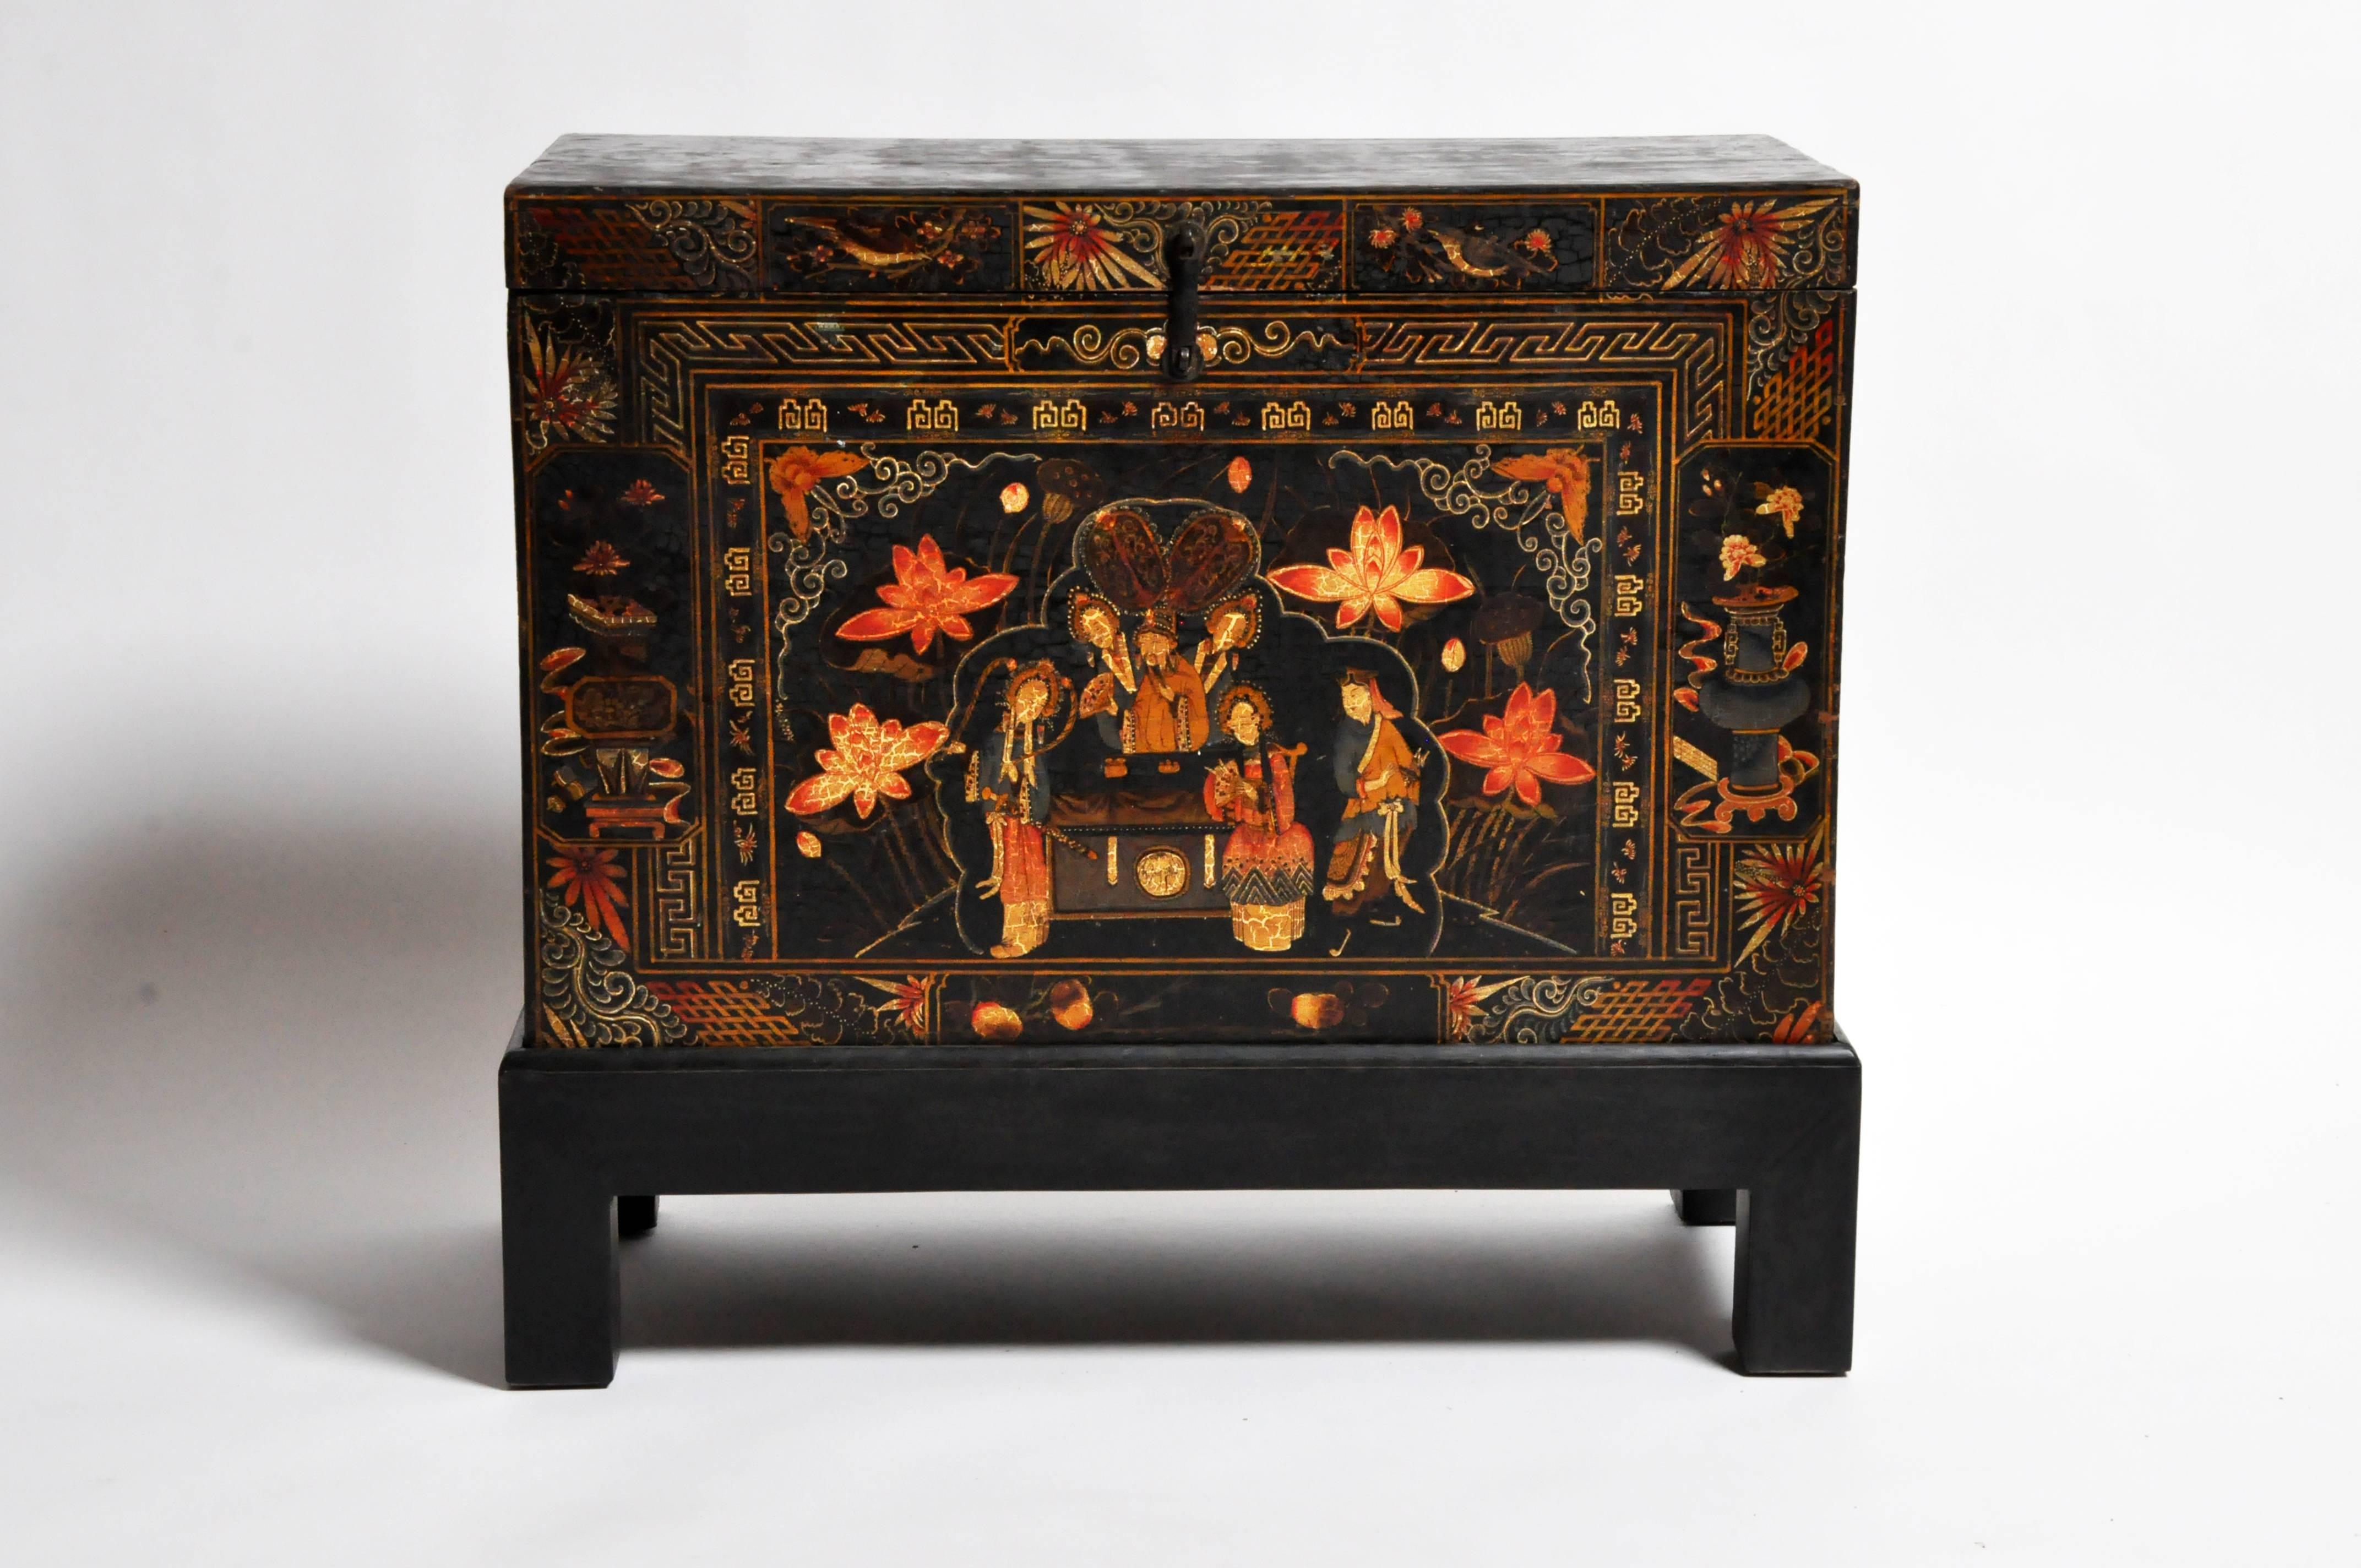 A late Qing dynasty chest from Shanxi China made from teak wood with paint. The piece has been elevated with a black wooden base and has a beautiful aged patina.